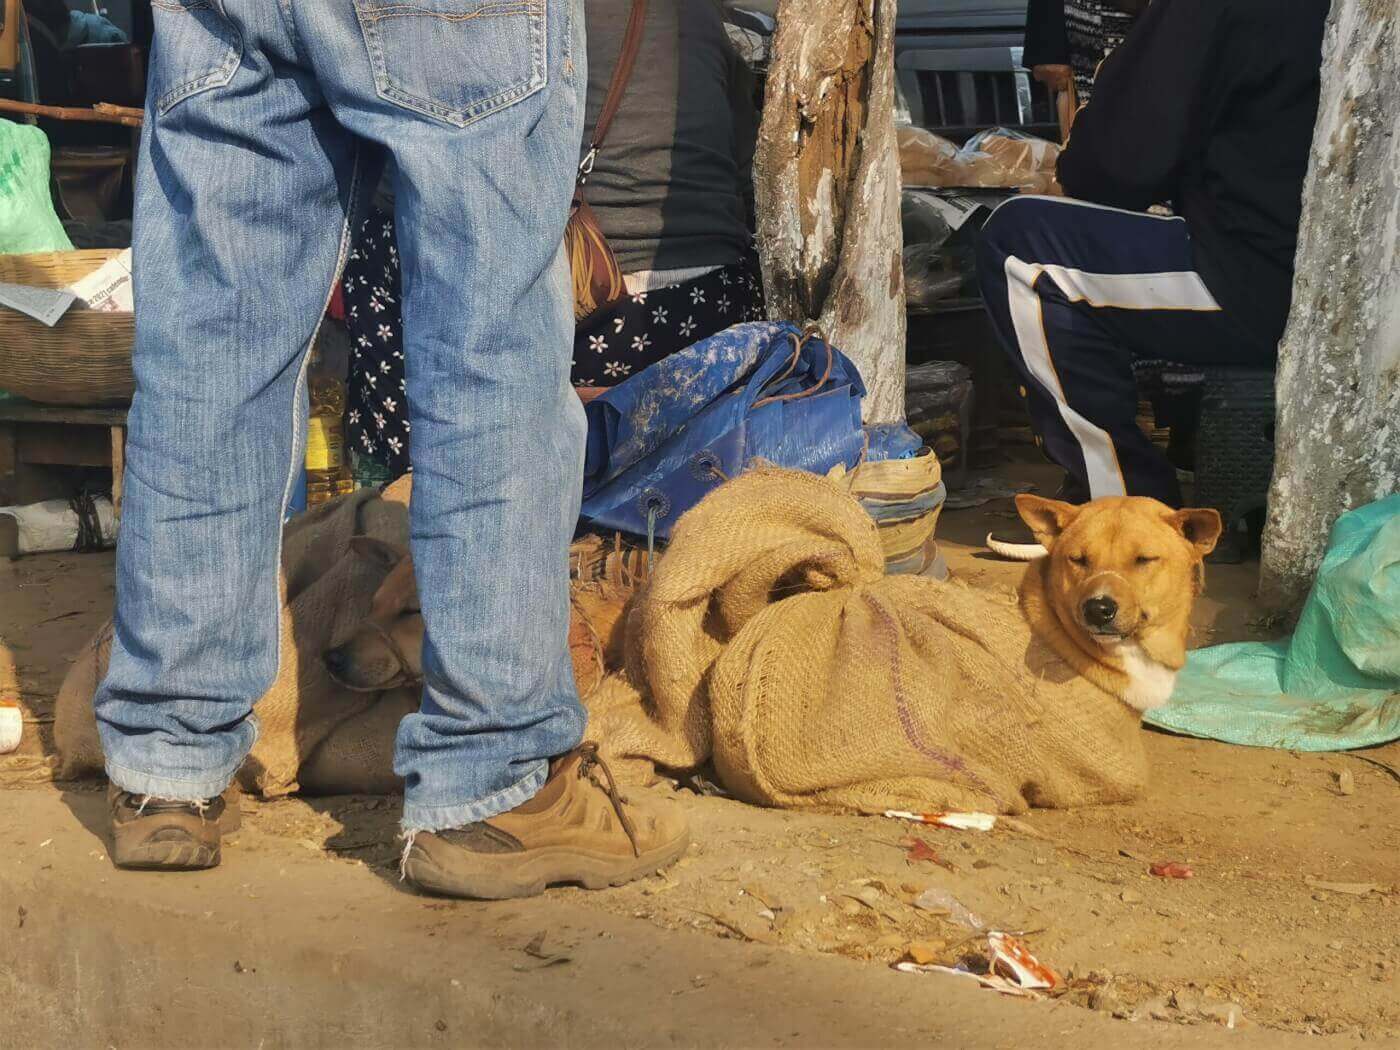 Dogs for sale at a live animal market in India.